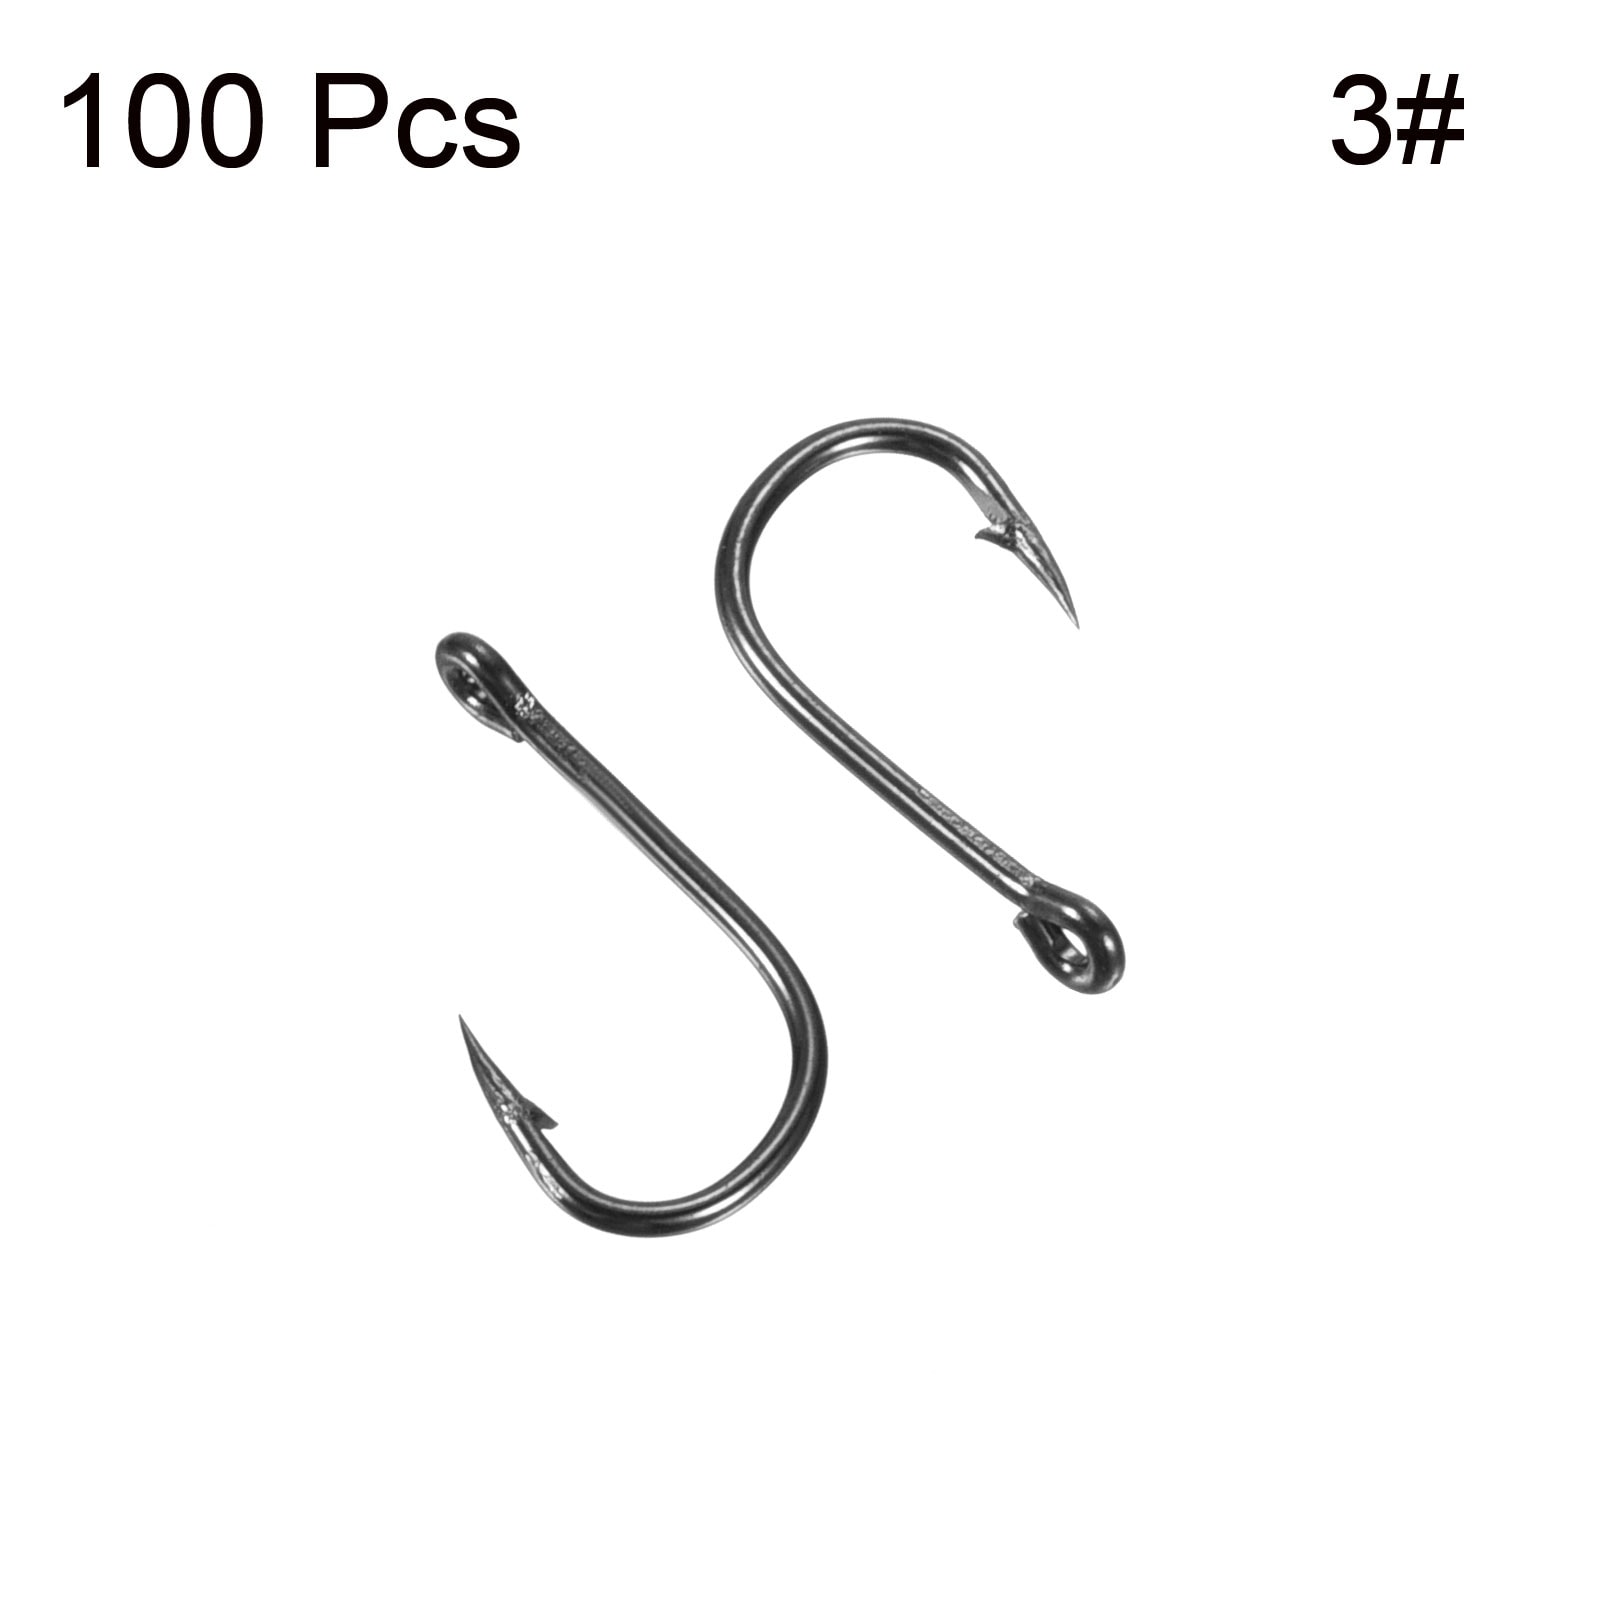 Catfish Hooks, 100 Pcs Claw Fishing Hook High Carbon Steel with